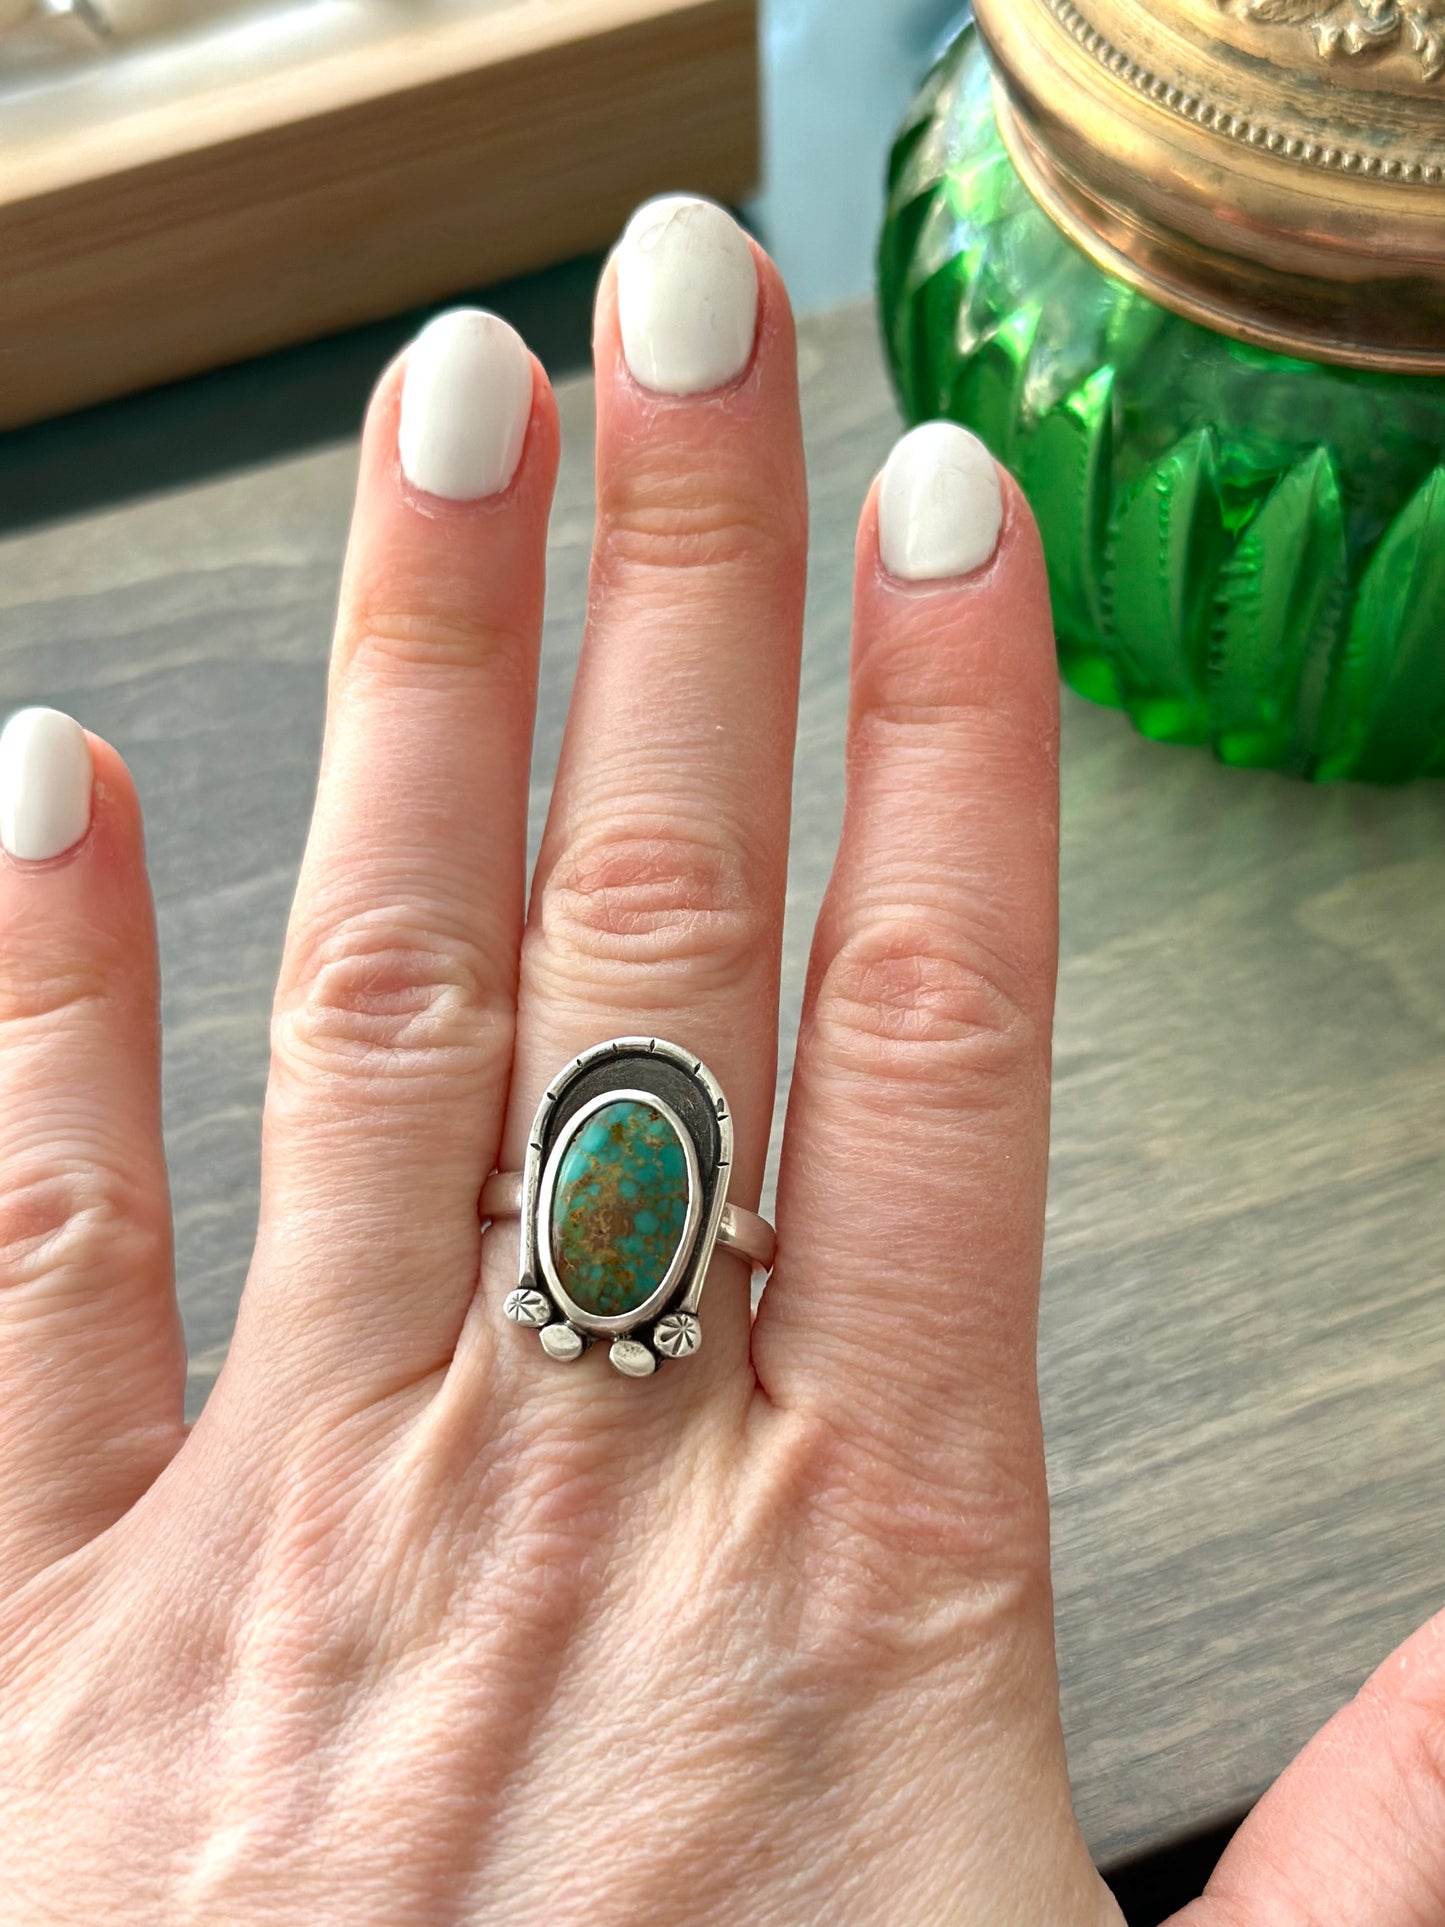 Sierra Bella Turquoise Arch Ring in size 8.75